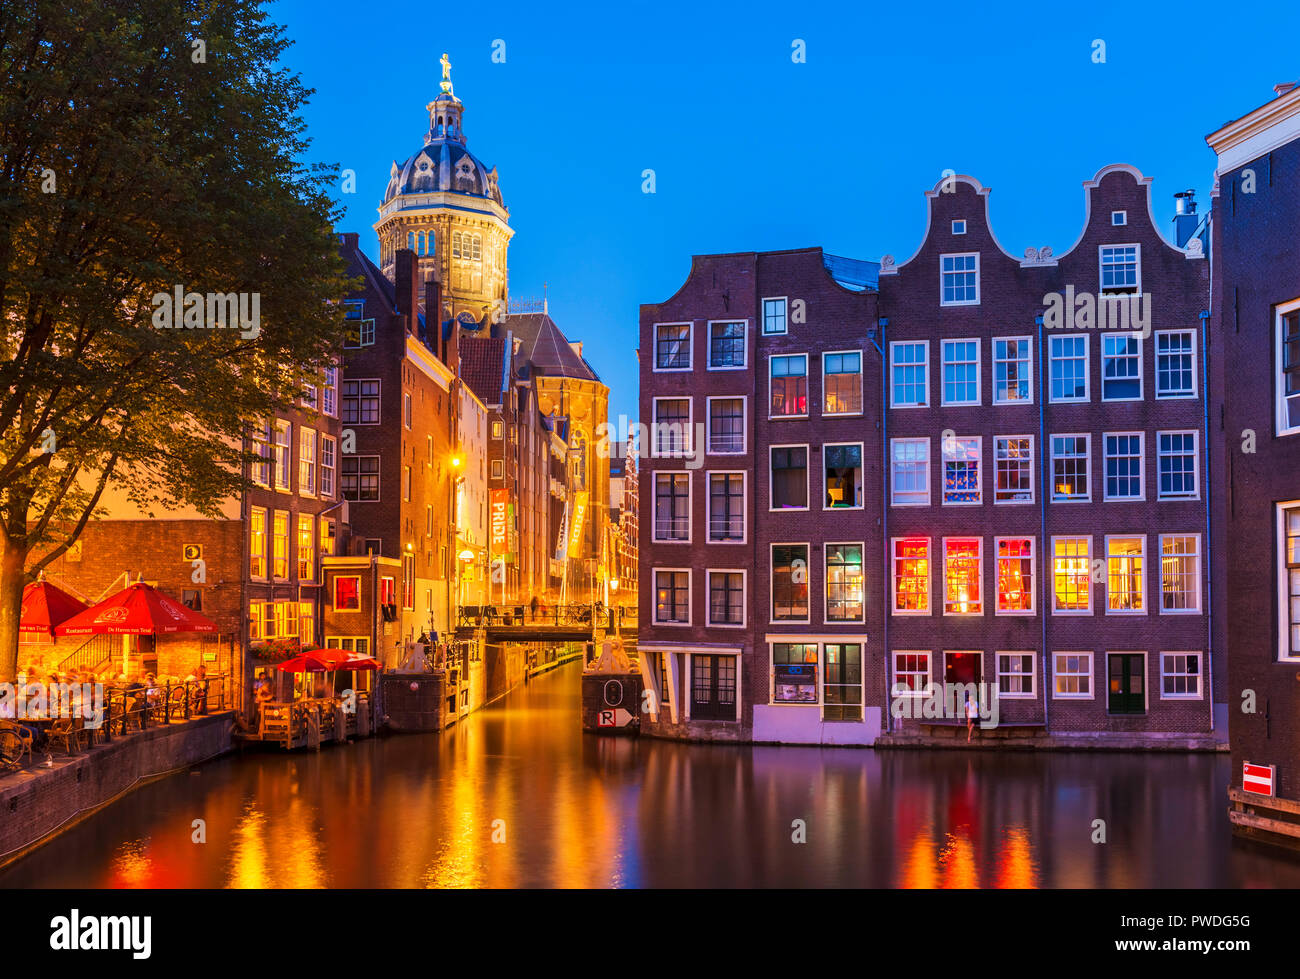 Amsterdam Night the dome of the Church of Saint Nicholas from the Armbrug bridge over the canal Oudezijds Voorburgwal Amsterdam  holland EU Europe Stock Photo